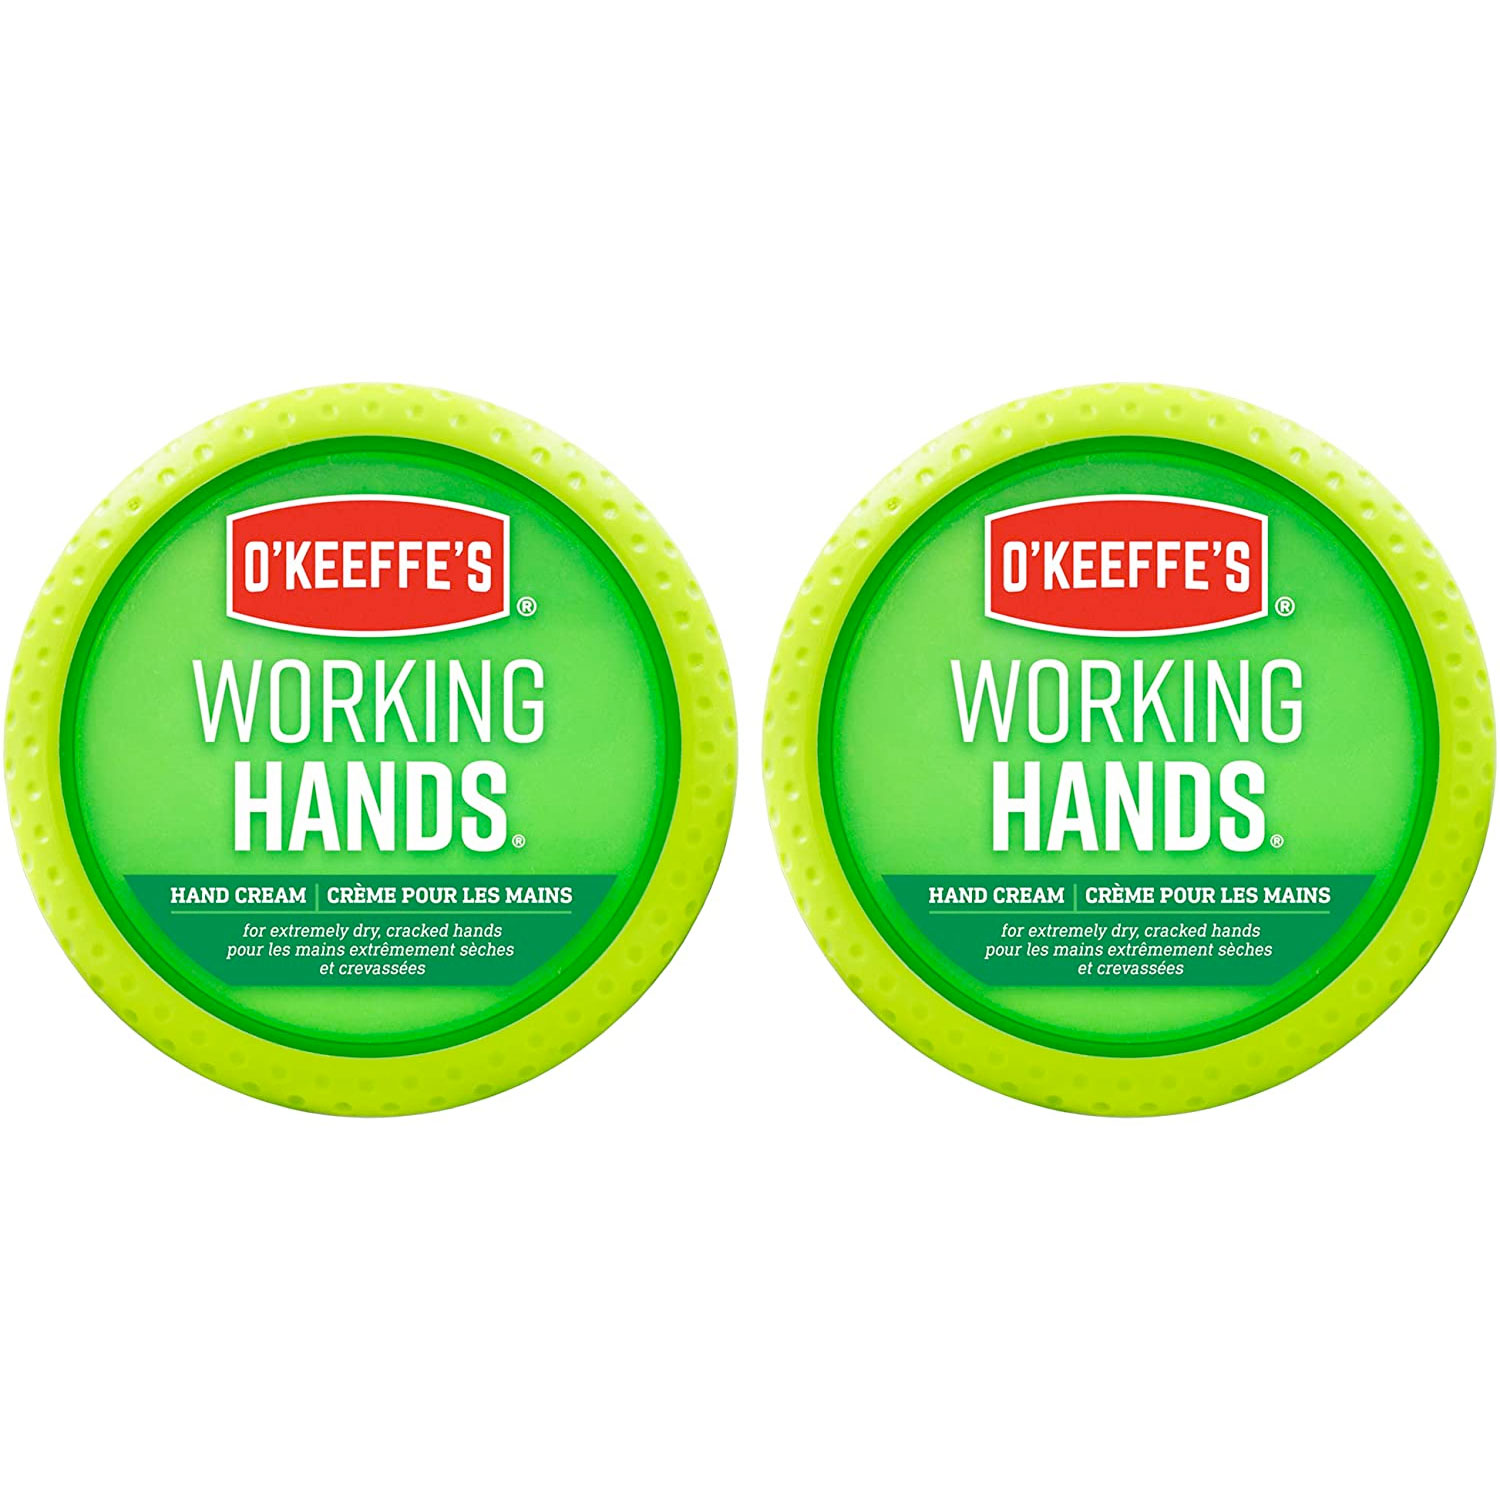 Amazon：O’Keeffe’s Working Hands Hand Cream(96g, Pack of 2)只卖$11.89